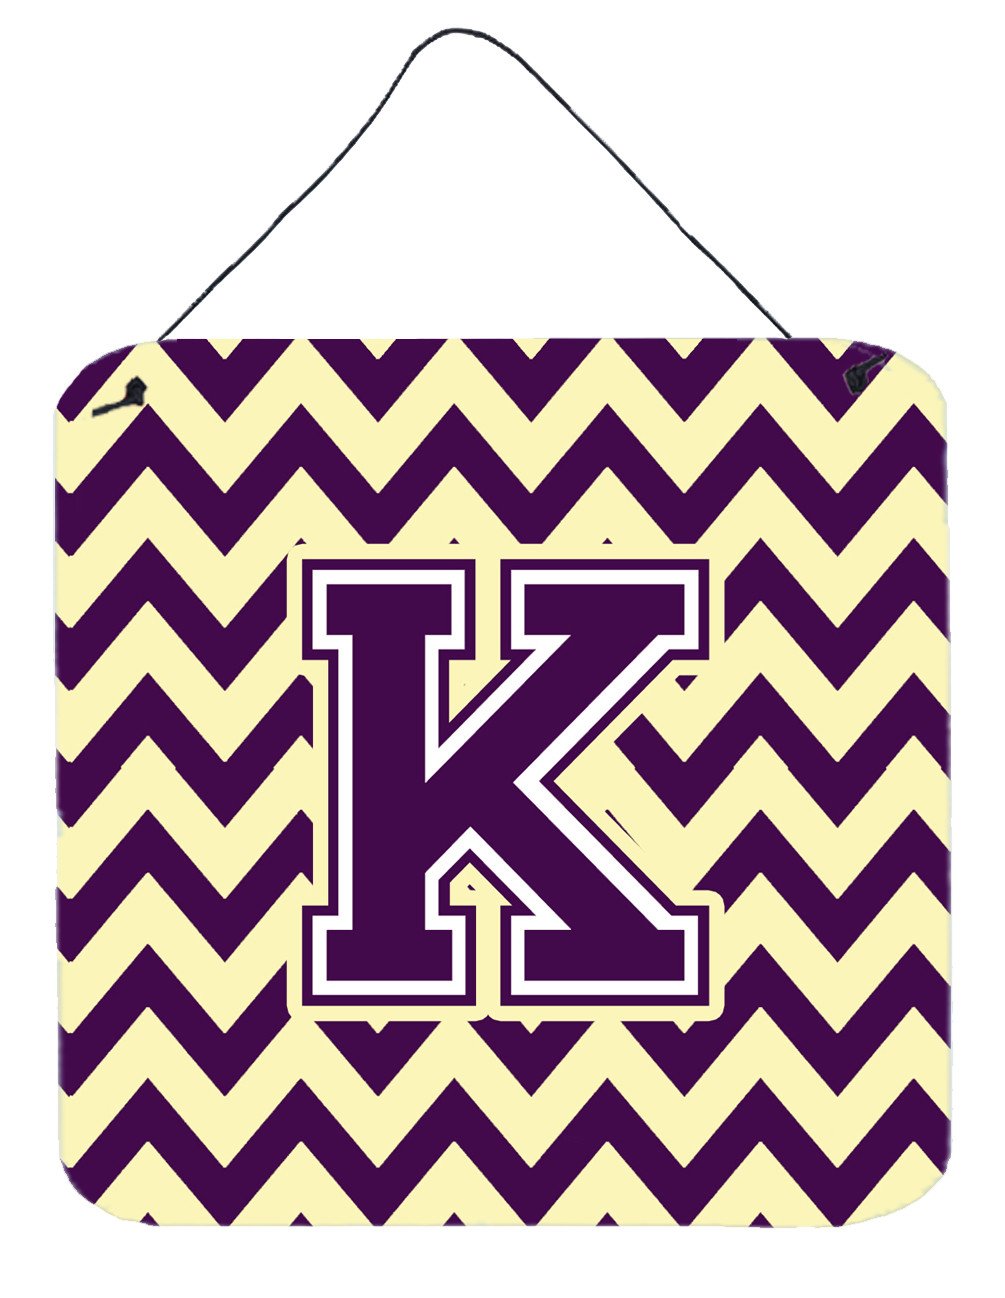 Letter K Chevron Purple and Gold Wall or Door Hanging Prints CJ1058-KDS66 by Caroline's Treasures